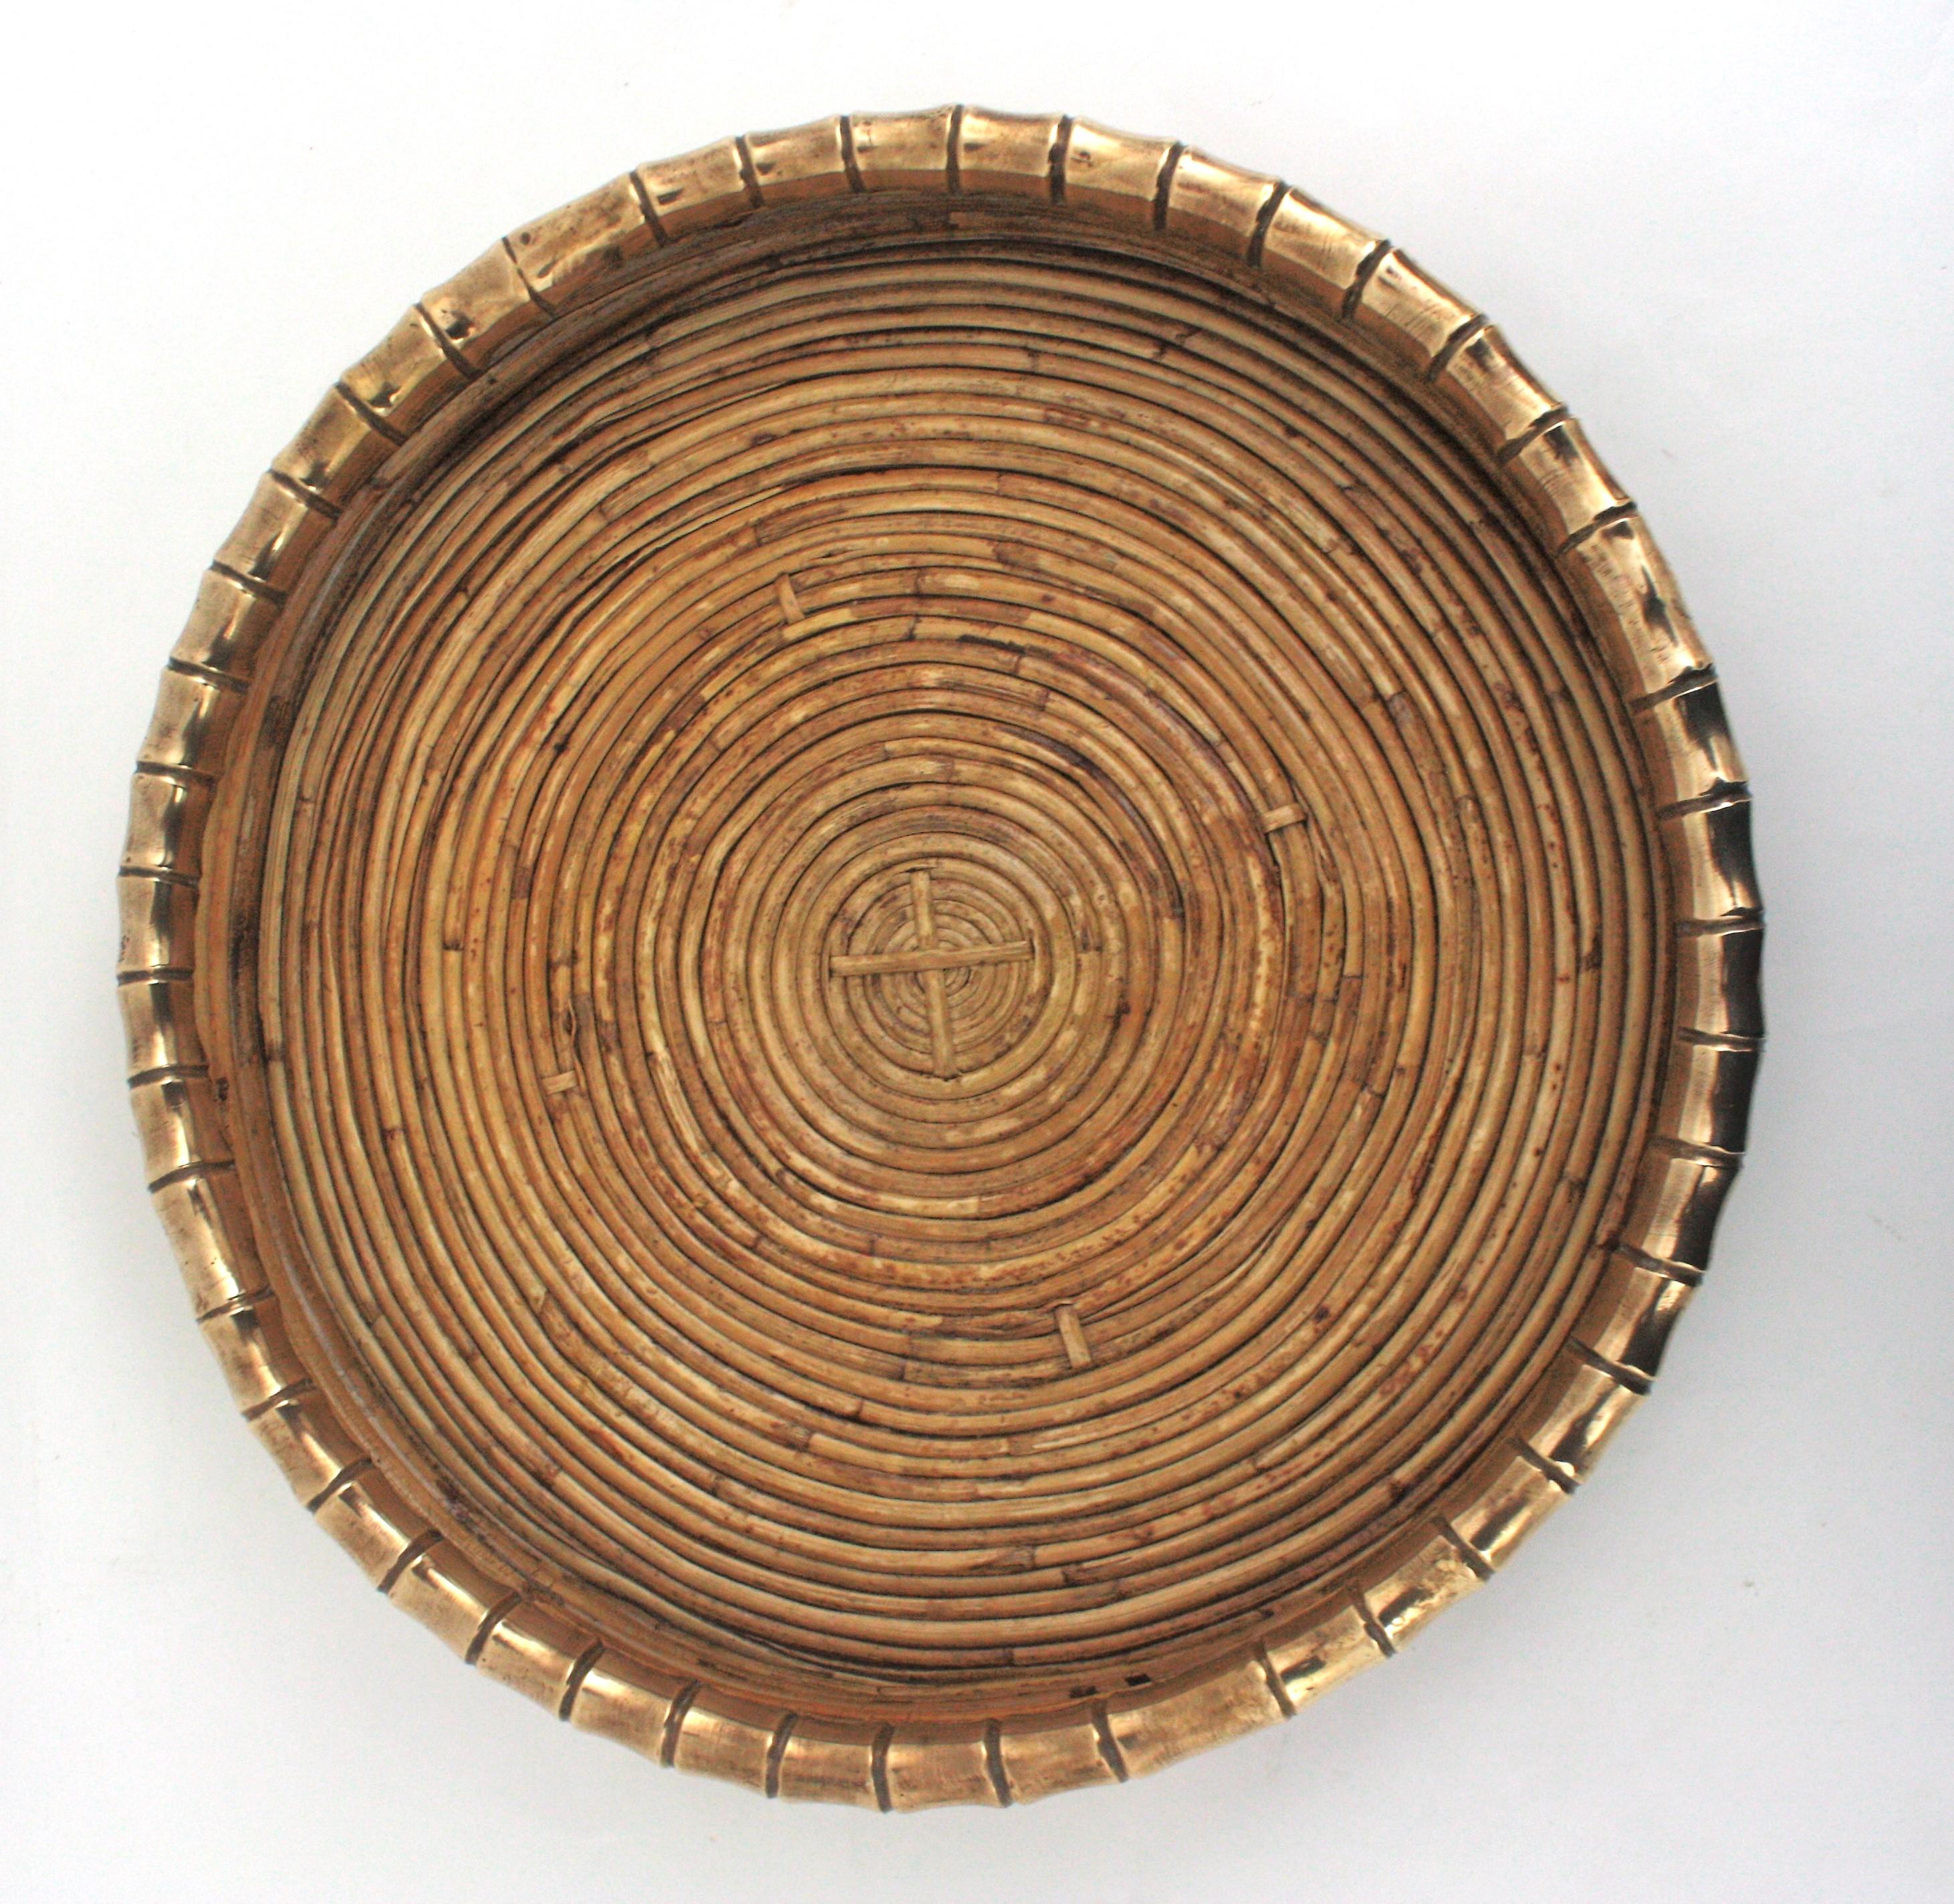 Rattan and Brass Round Centerpiece with Faux Bamboo Rim, Italy, 1970s For Sale 2